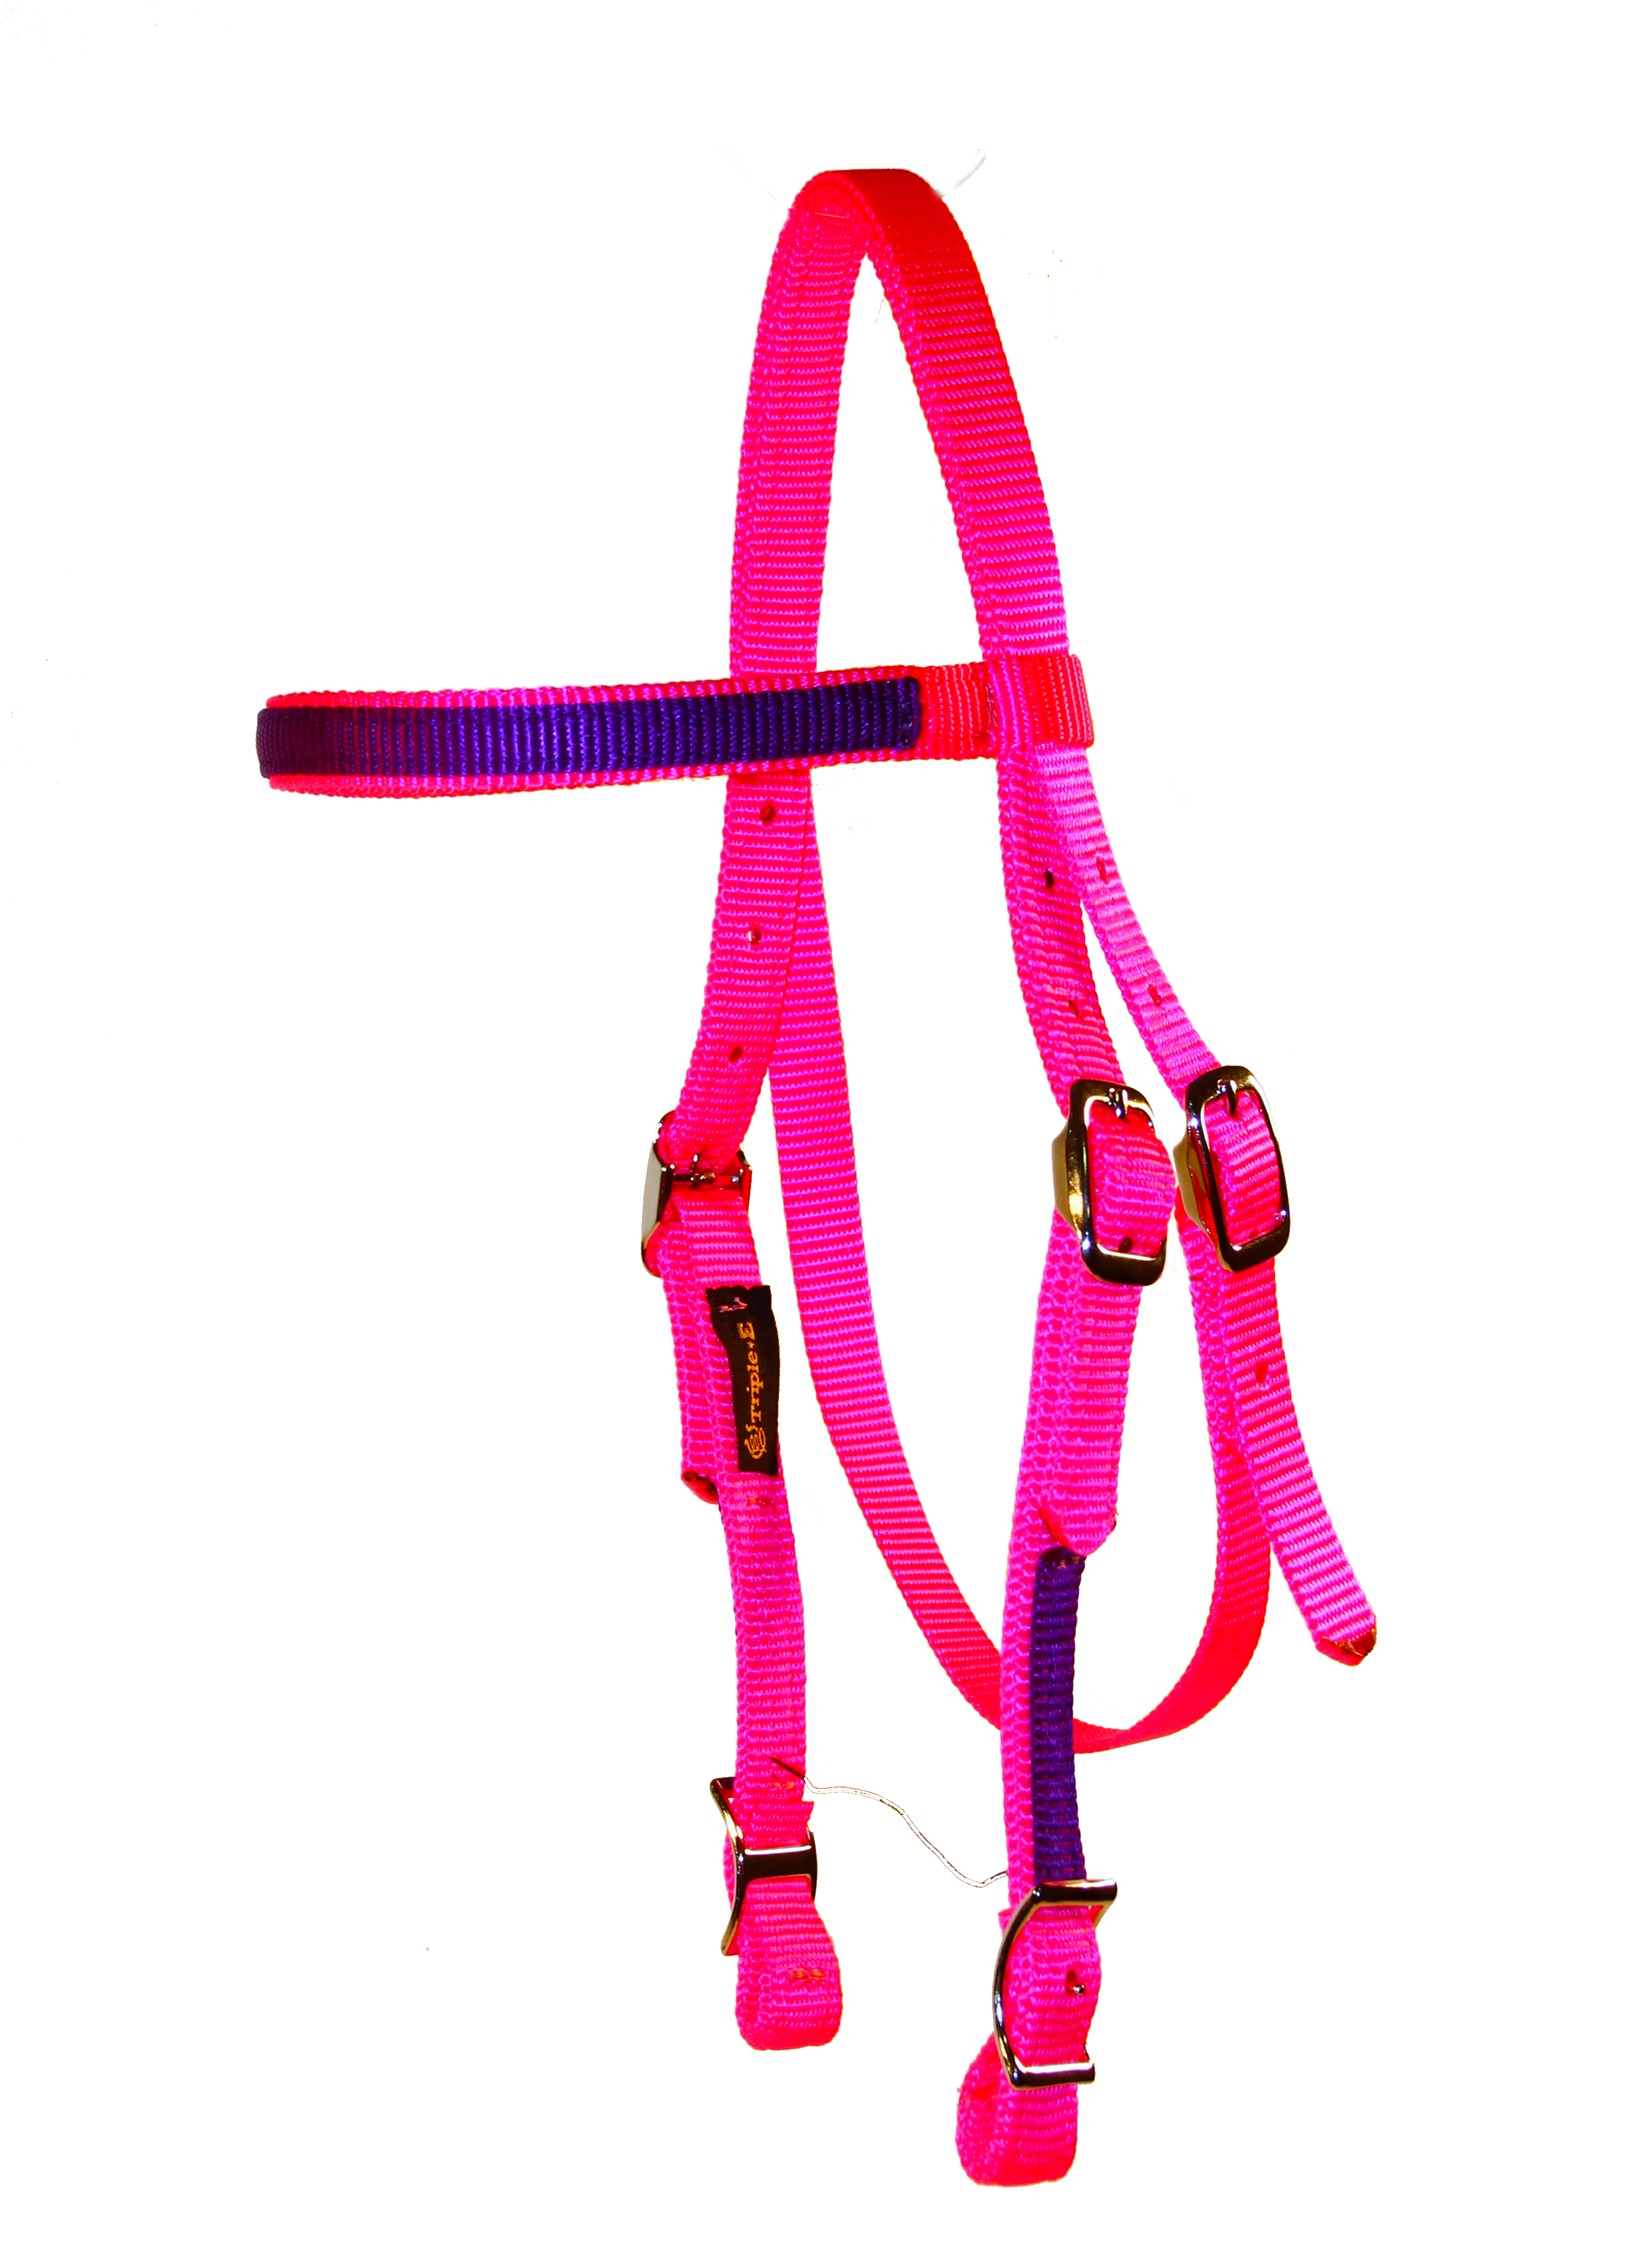 NYLON MINI HEADSTALL WITH CONWAY BUCKLES & OVERLAY, 5/8″ NYLON, mini, headstall, overlay, nylon, Triple E Manufacturing